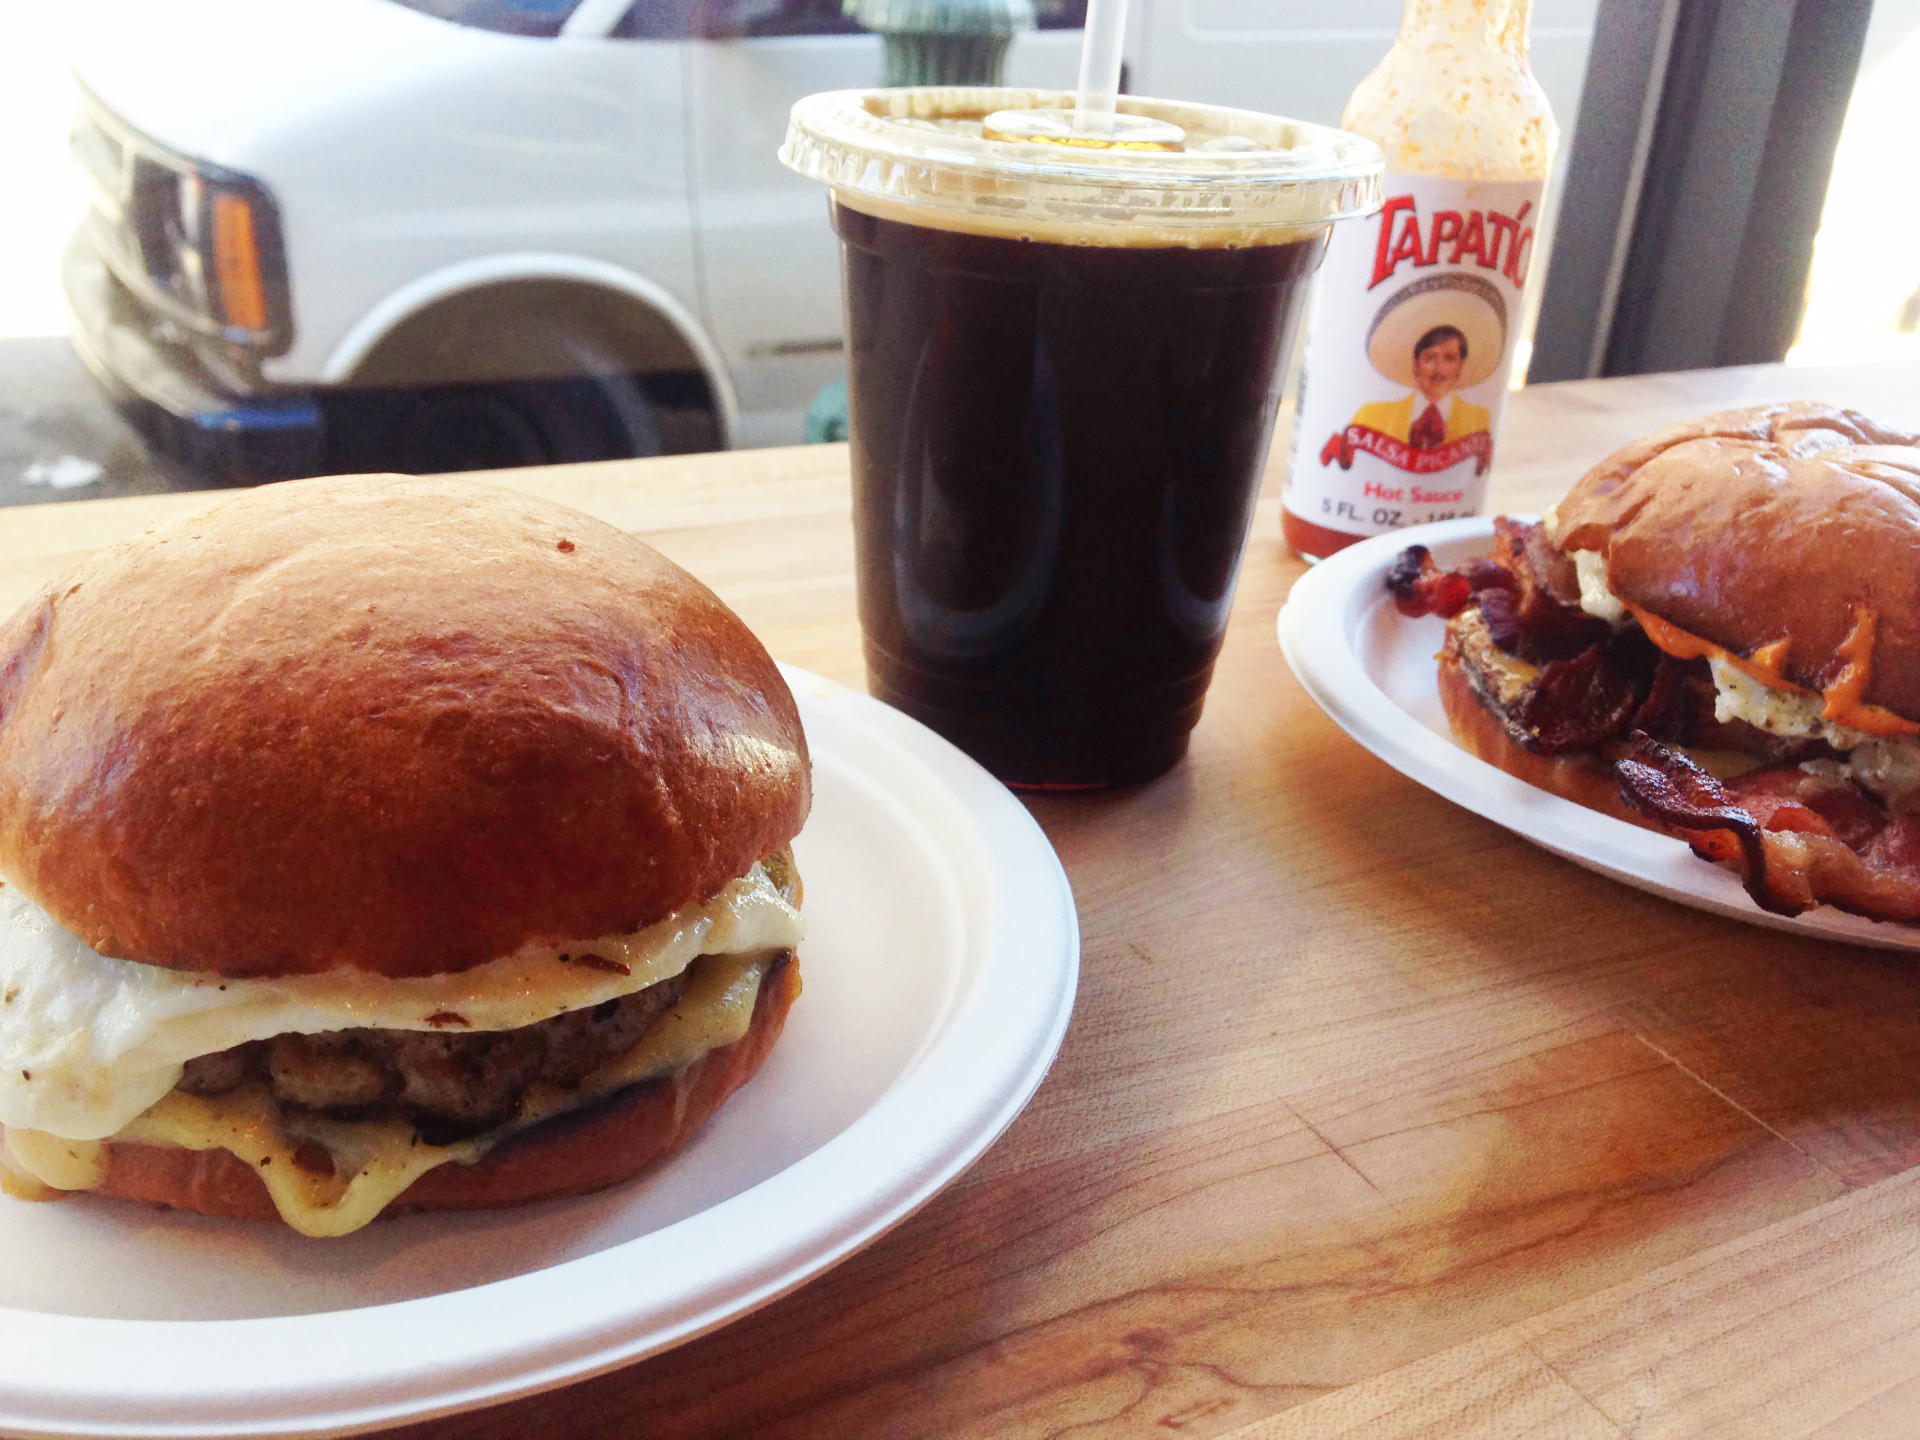 Some of the Gatropig's breakfast sandwich options, and their cold brew.